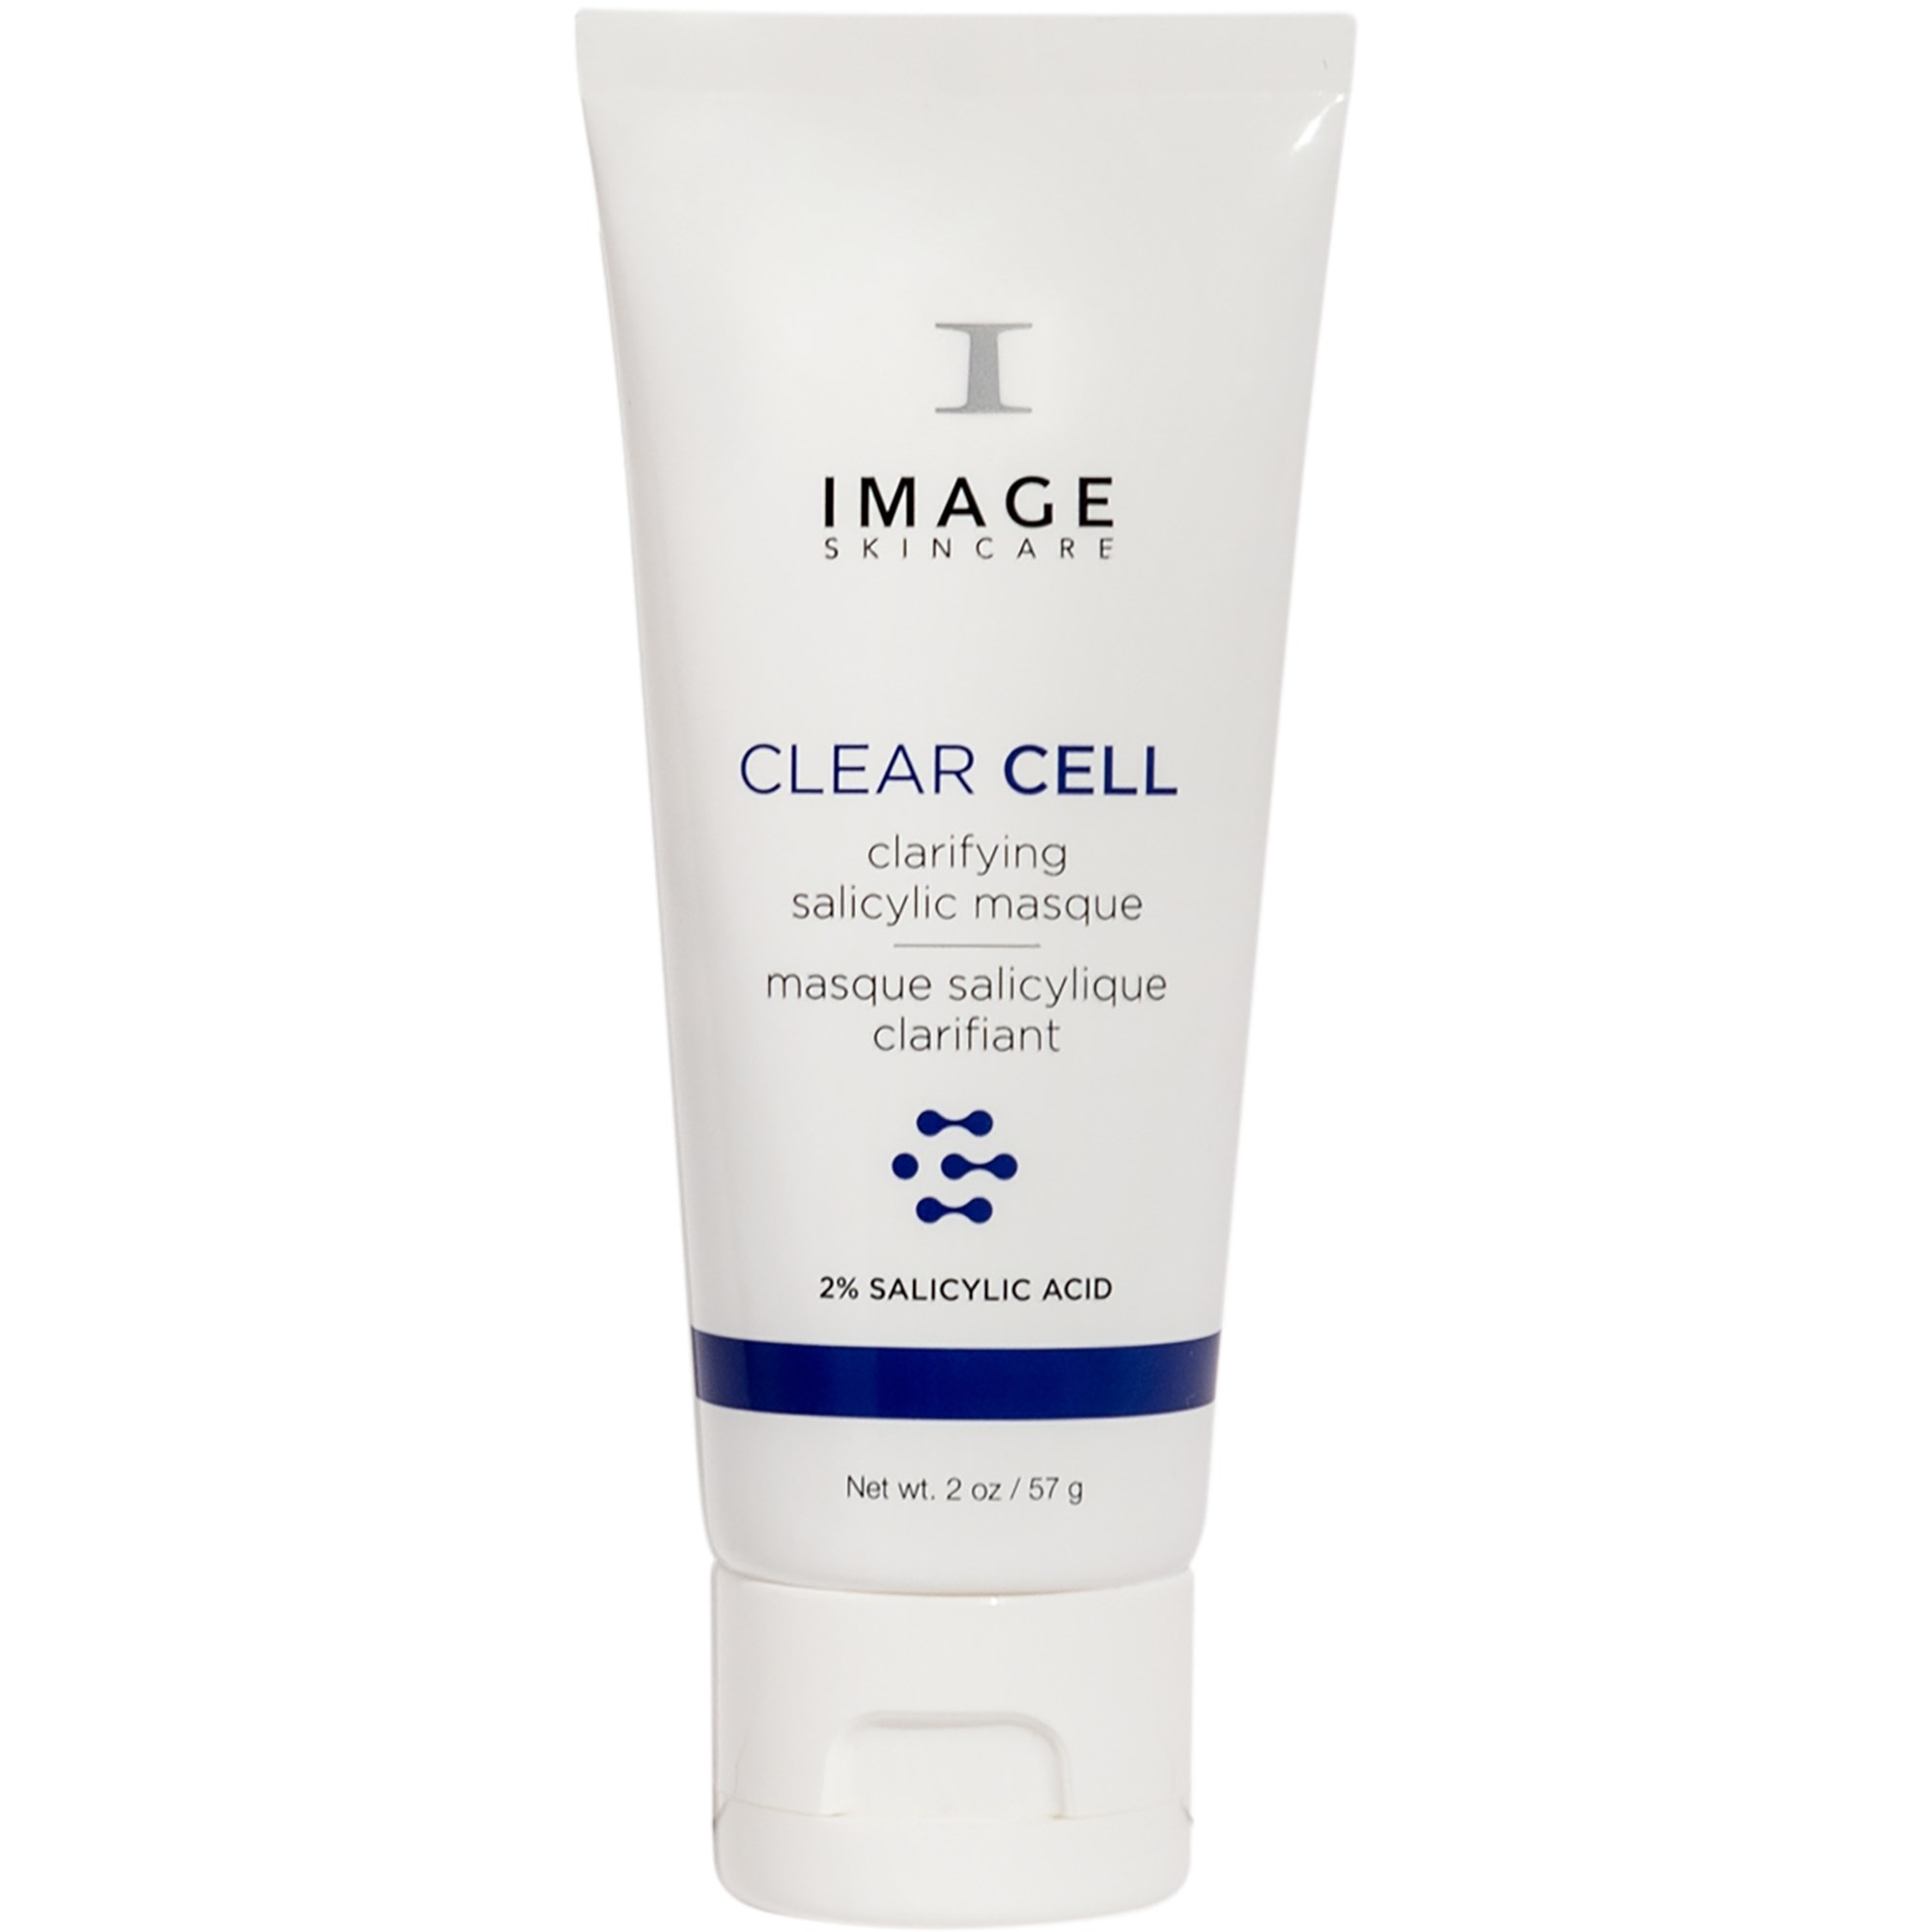 Läs mer om IMAGE Skincare Clear Cell Clarifying Salicylic Masque 57 g